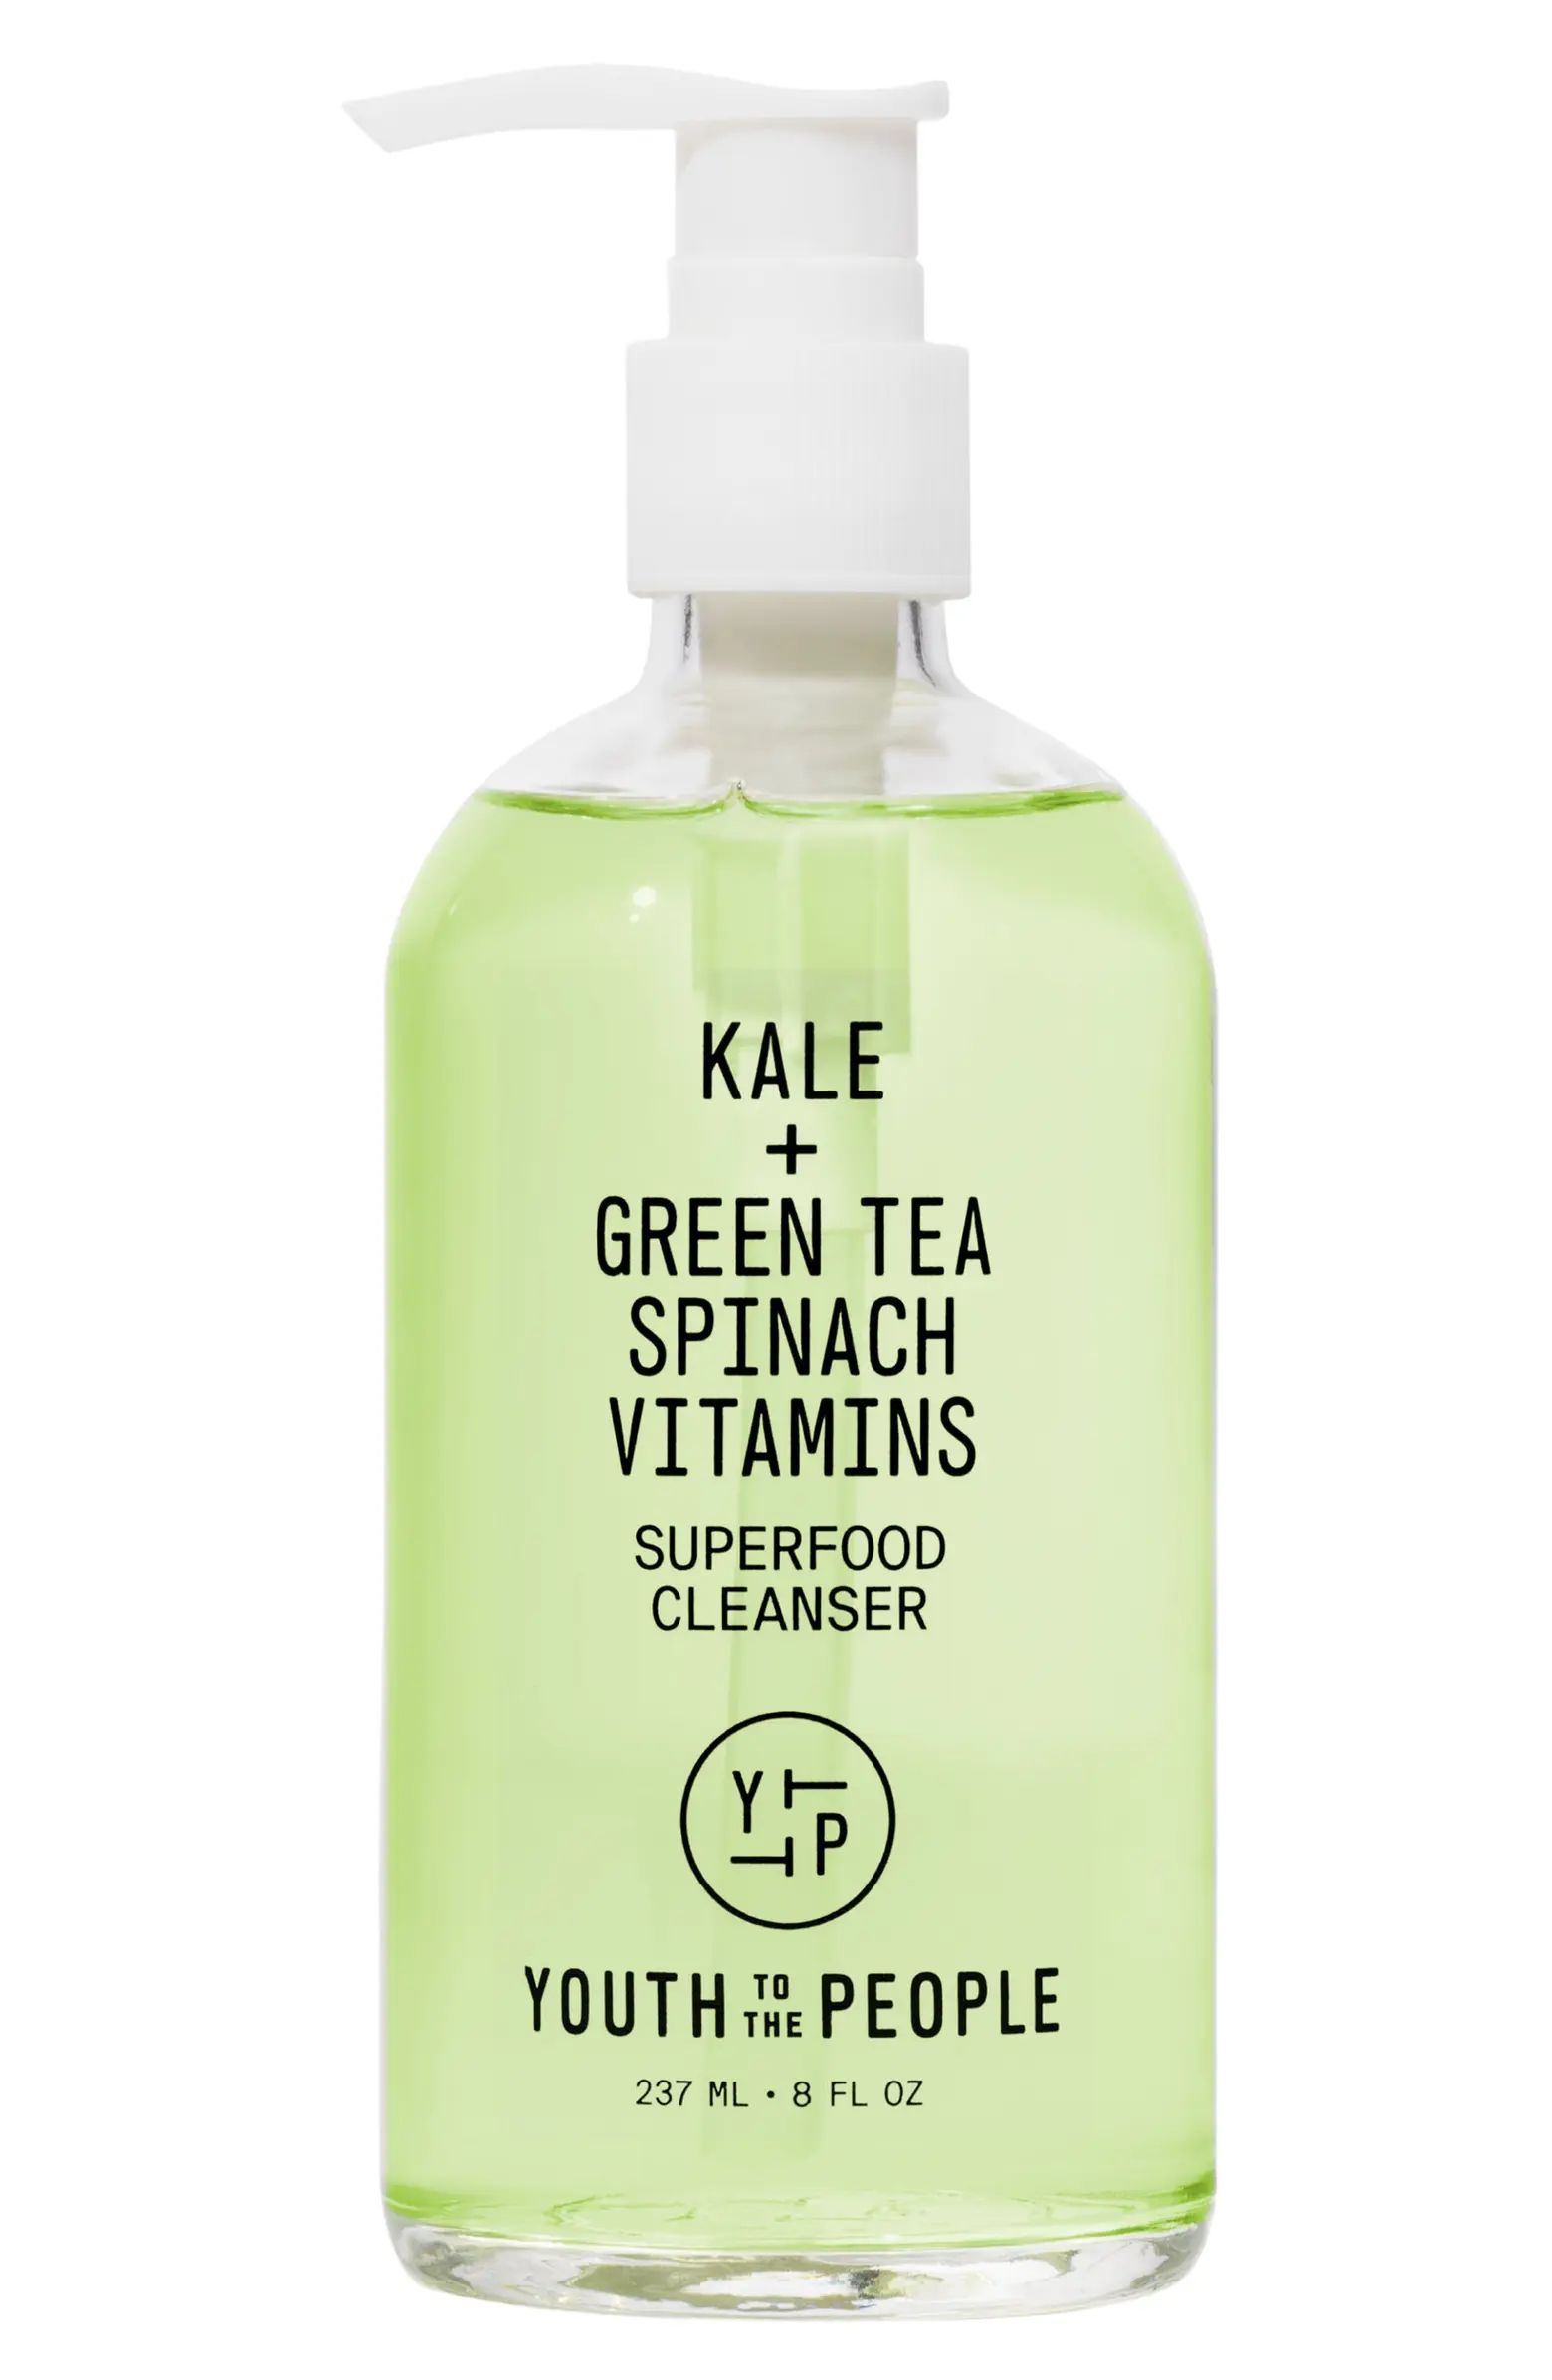 Youth to the People Superfood Cleanser | Nordstrom | Nordstrom